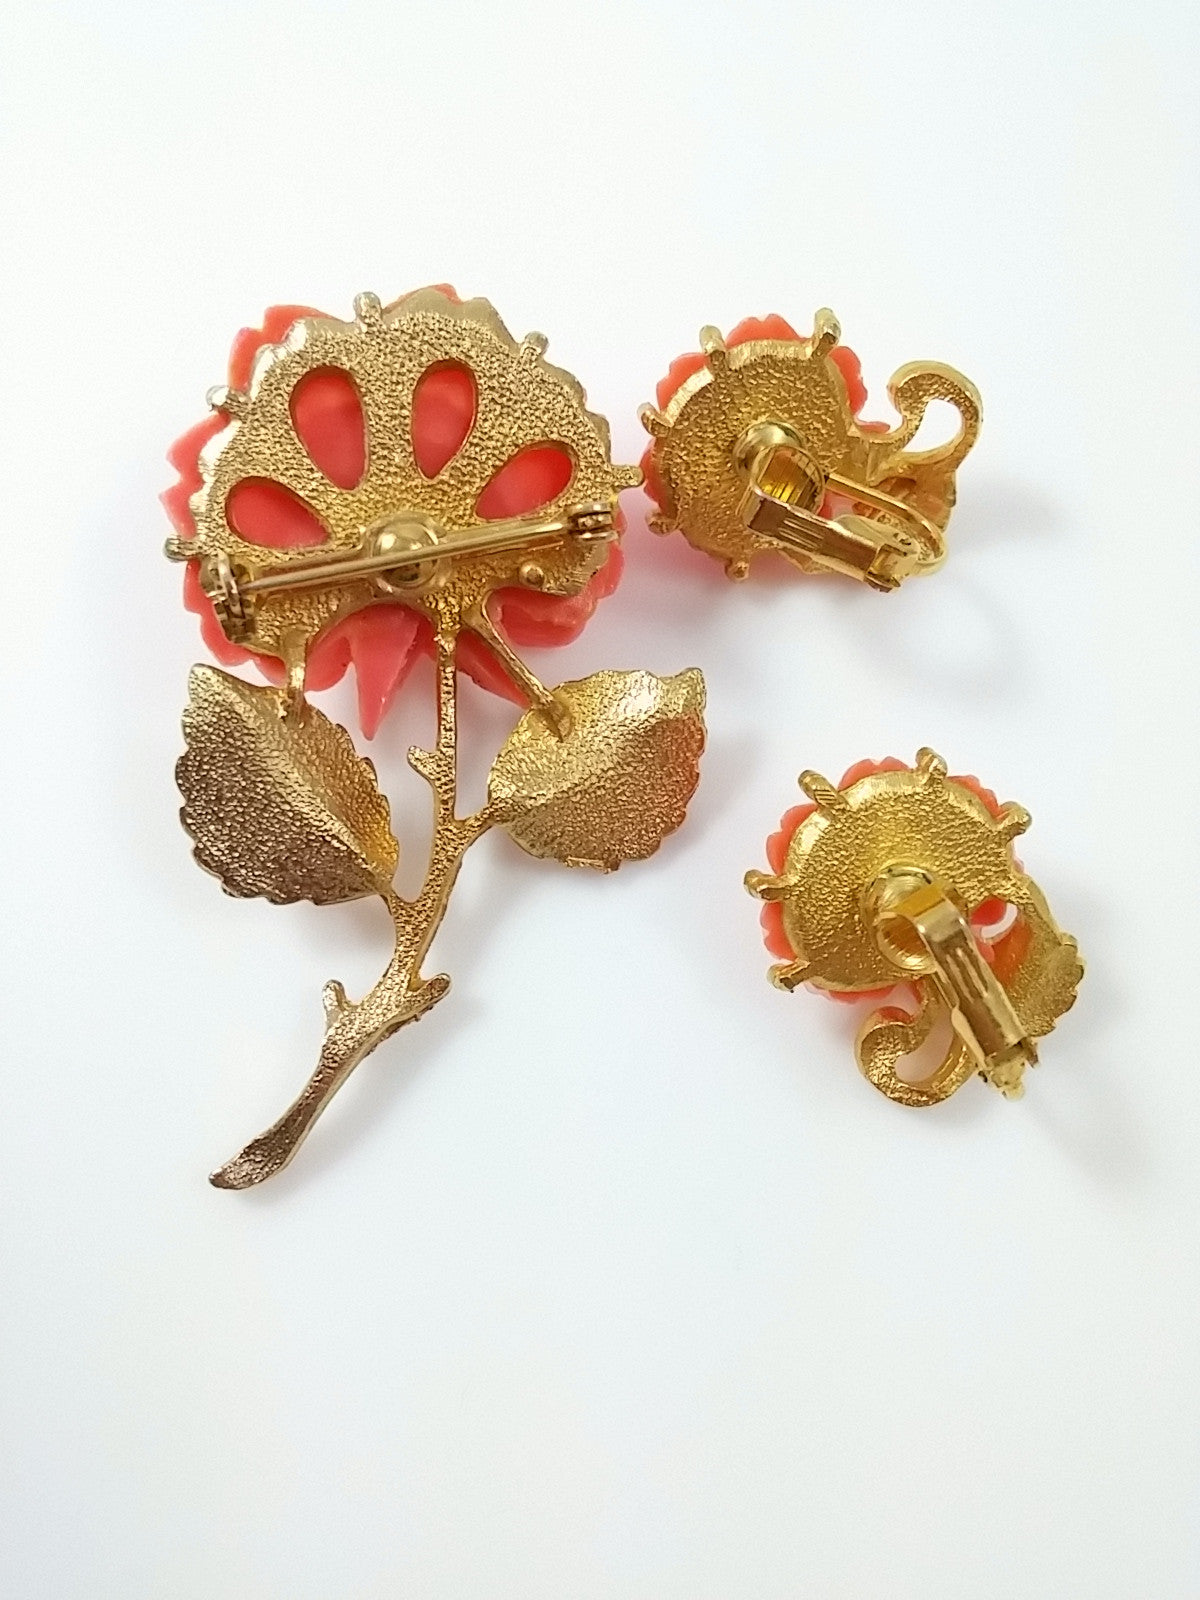 Vintage Brooch & Earrings Demi Coral Colored Carved Rose Pin w/ matching Earrings - Dirty 30 Vintage